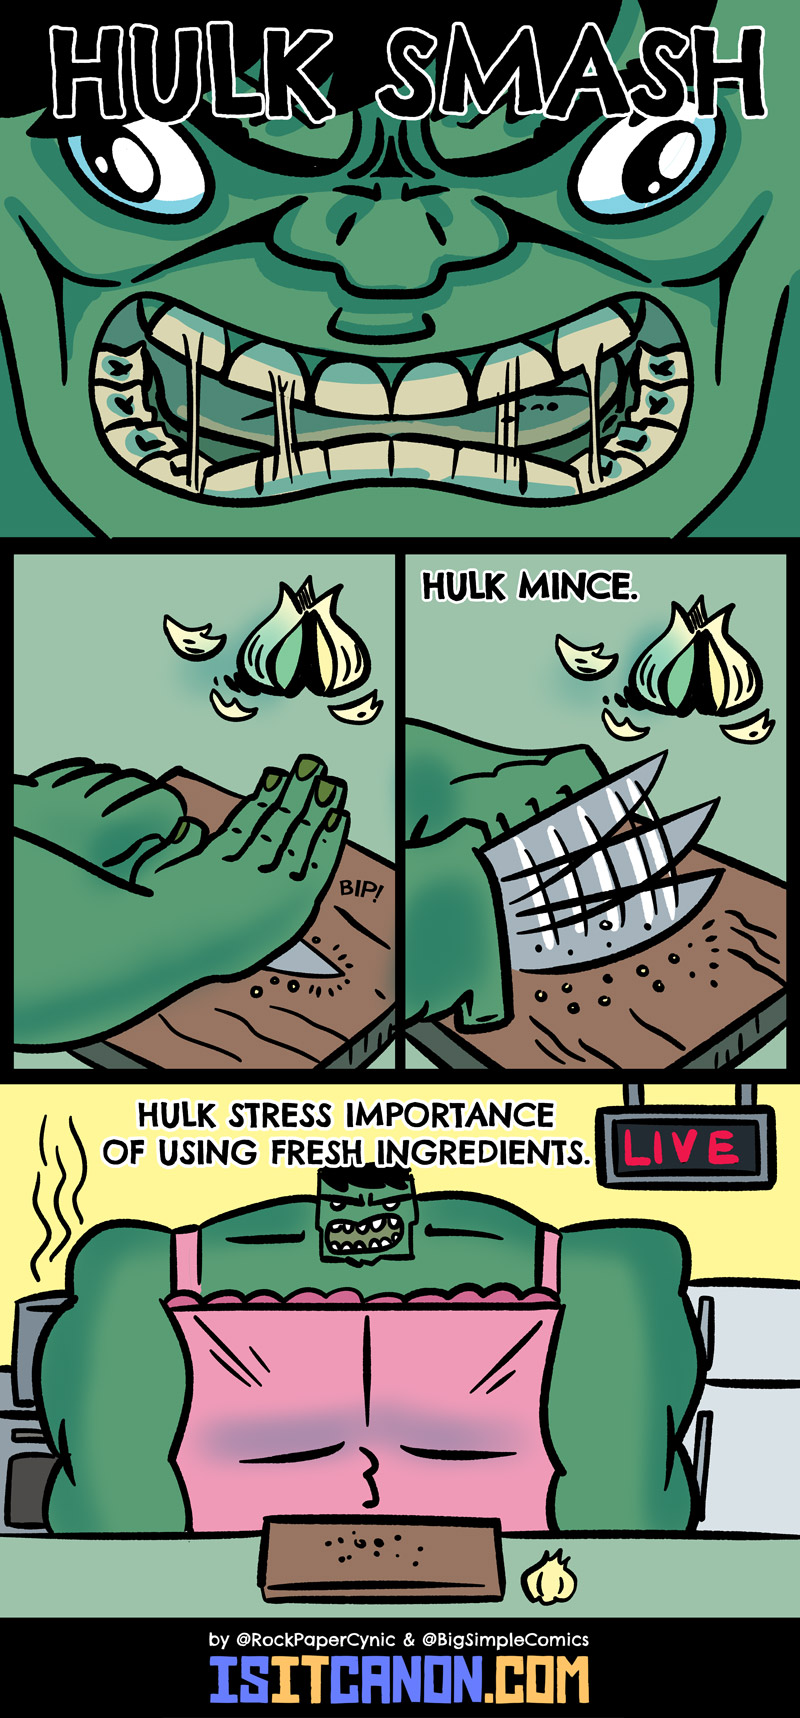 In this comic, the Incredible Hulk gets his own cooking show and puts his unique skills to work.